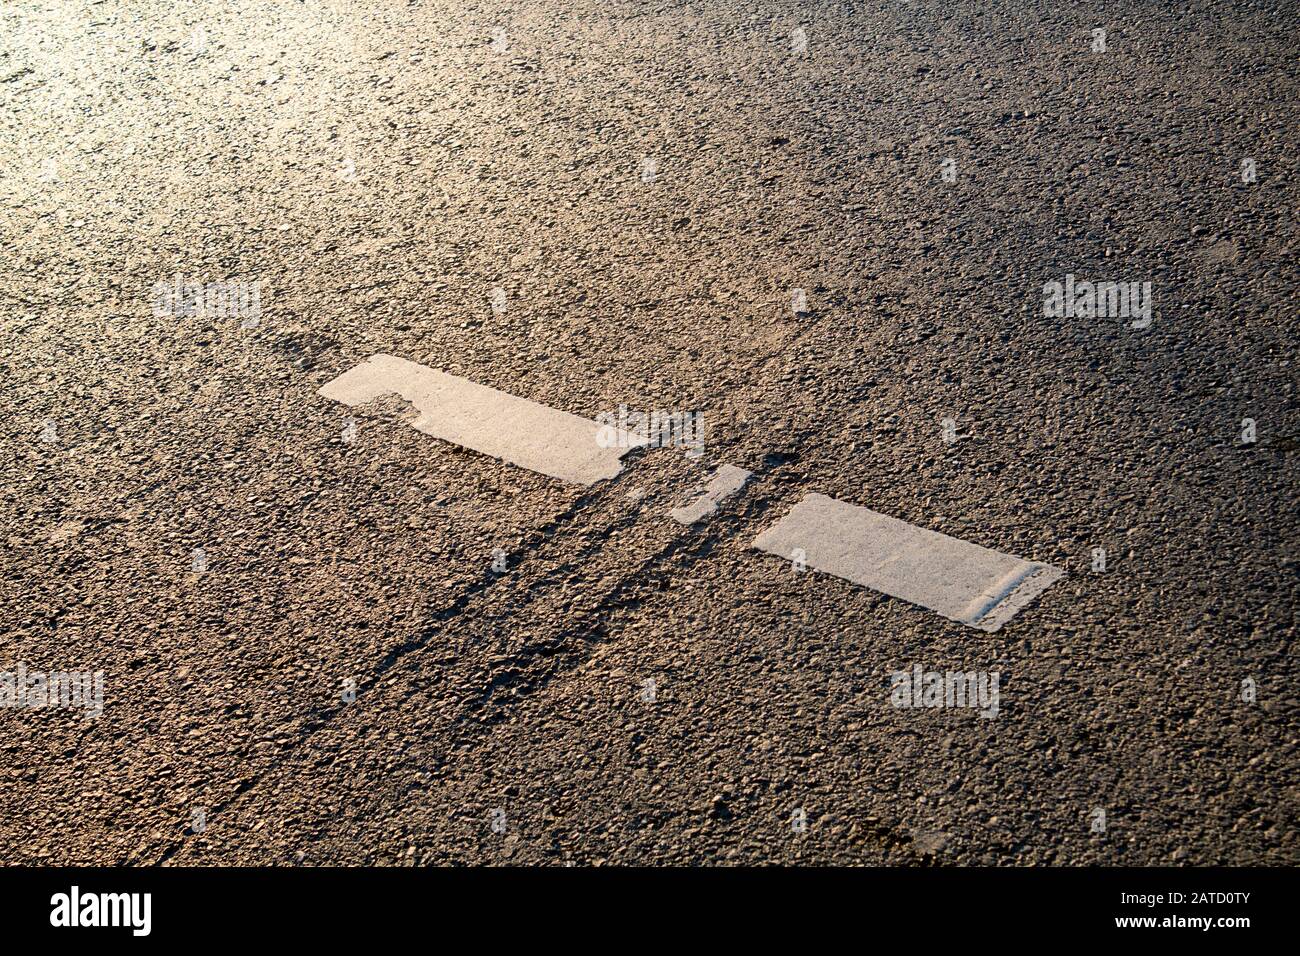 Close up of a scar on asphalt road, dividing a thermoplastic road mark,  reminding a jurassic attack. Highway policy, upkeep, maintenance concepts. Stock Photo